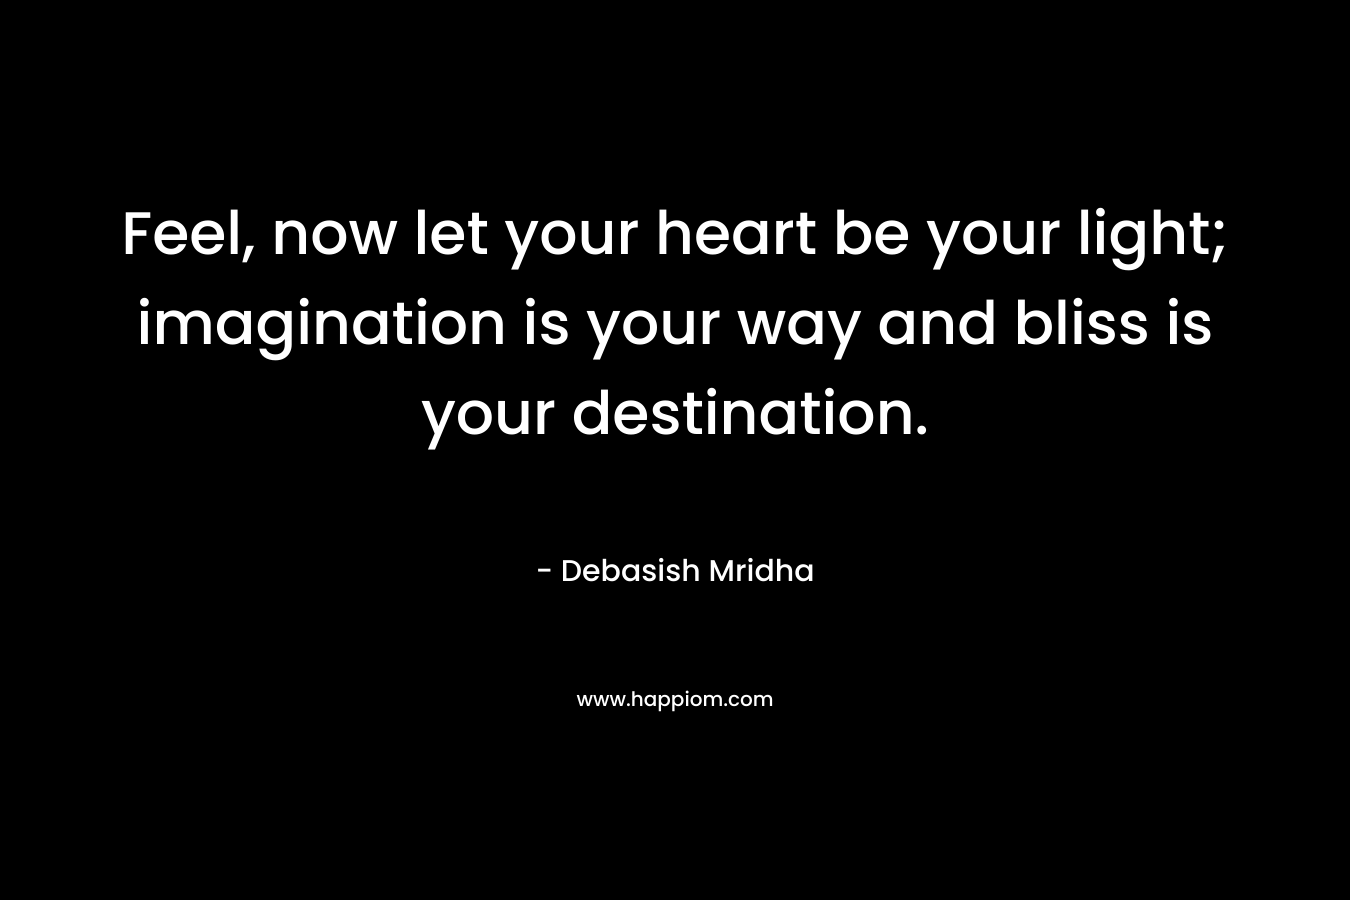 Feel, now let your heart be your light; imagination is your way and bliss is your destination.